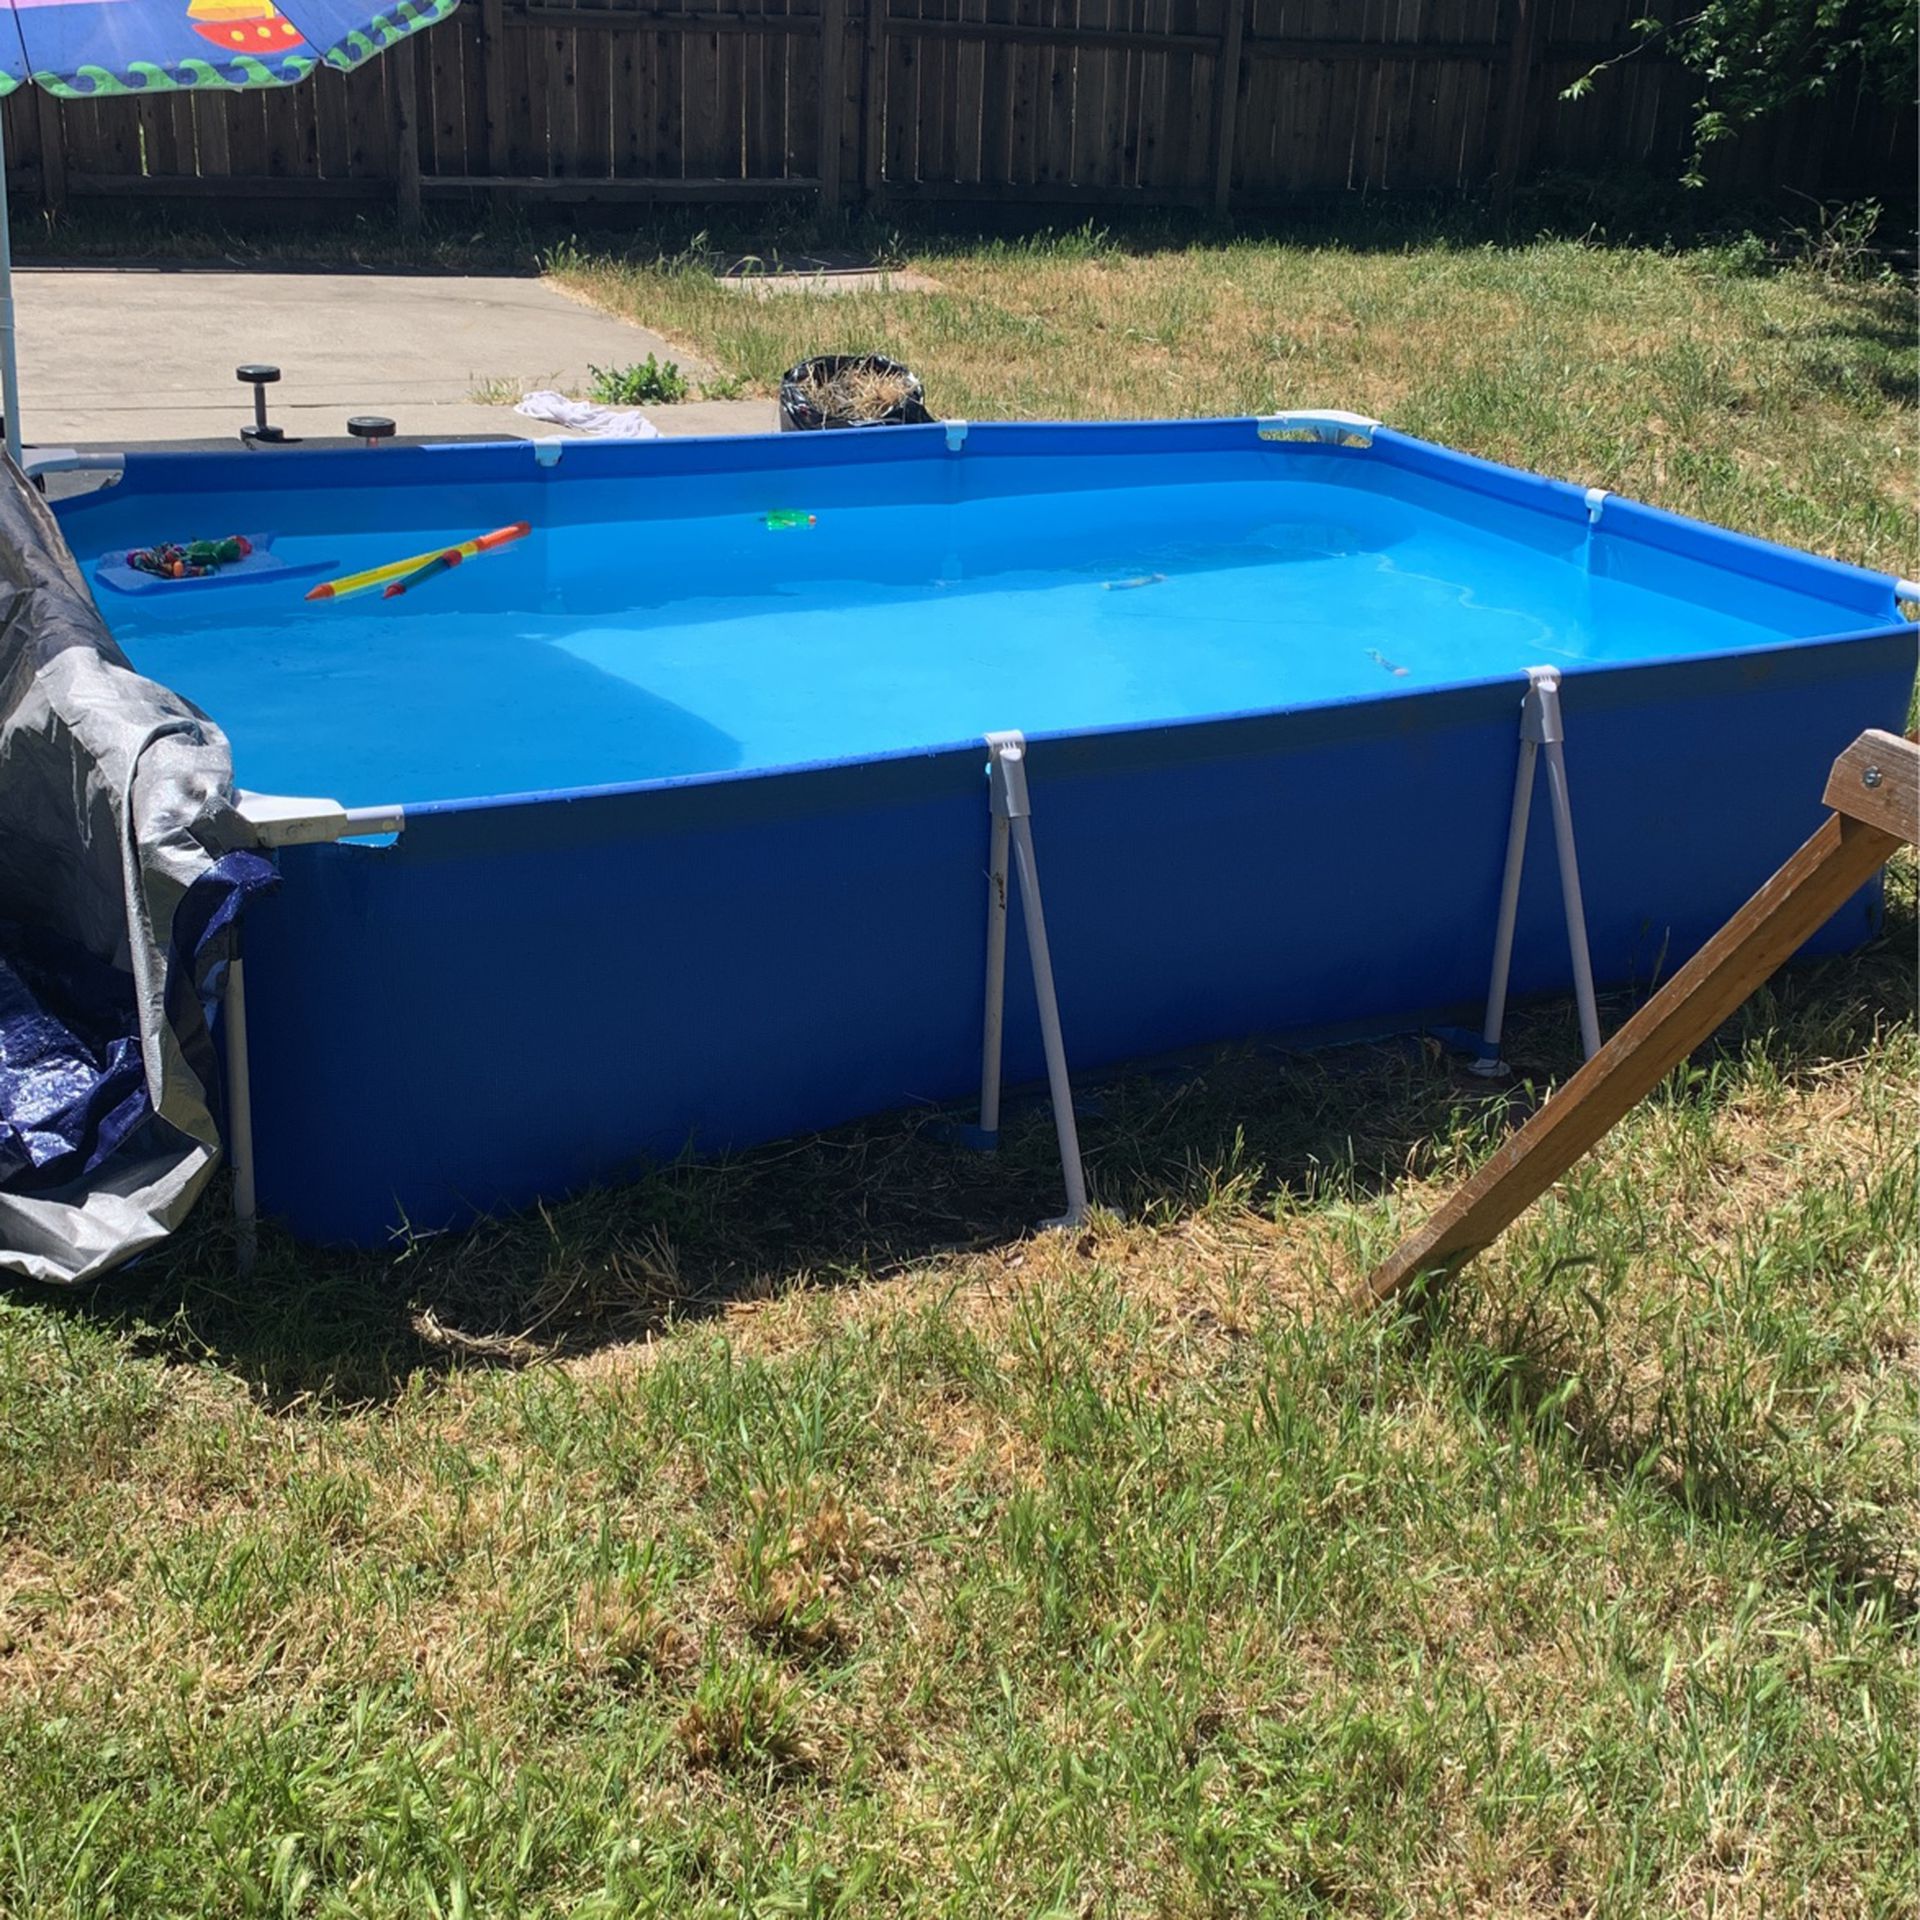 28 Inches Deep Pool $100